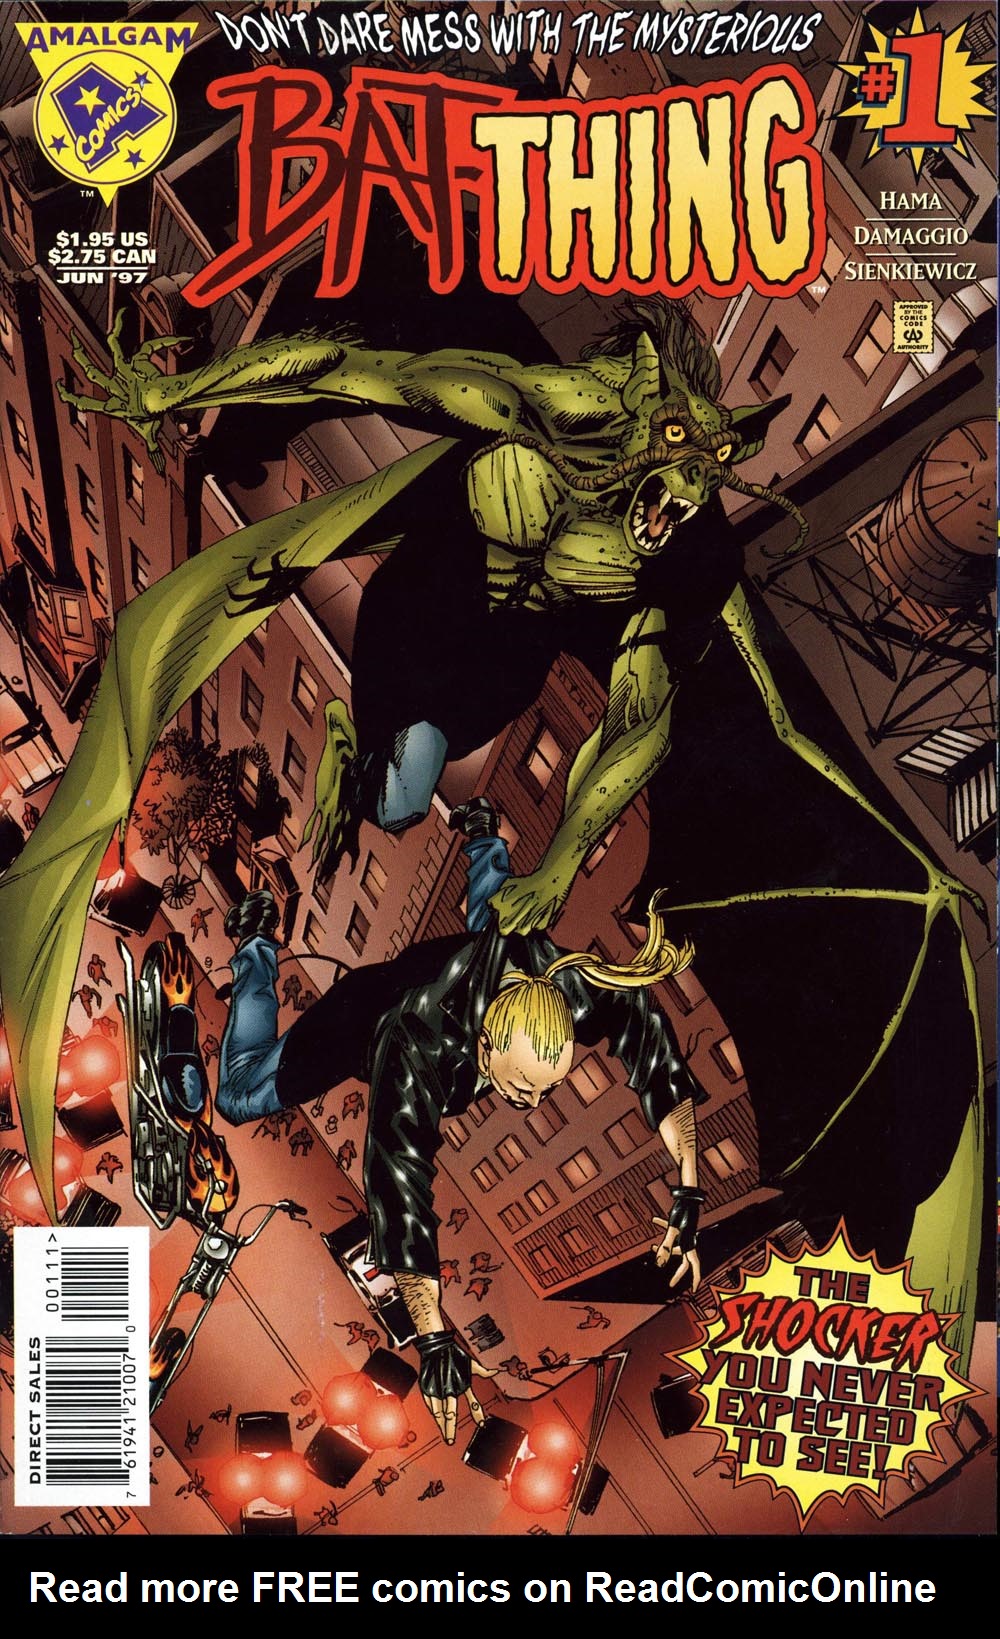 Read online Bat-Thing comic -  Issue # Full - 1